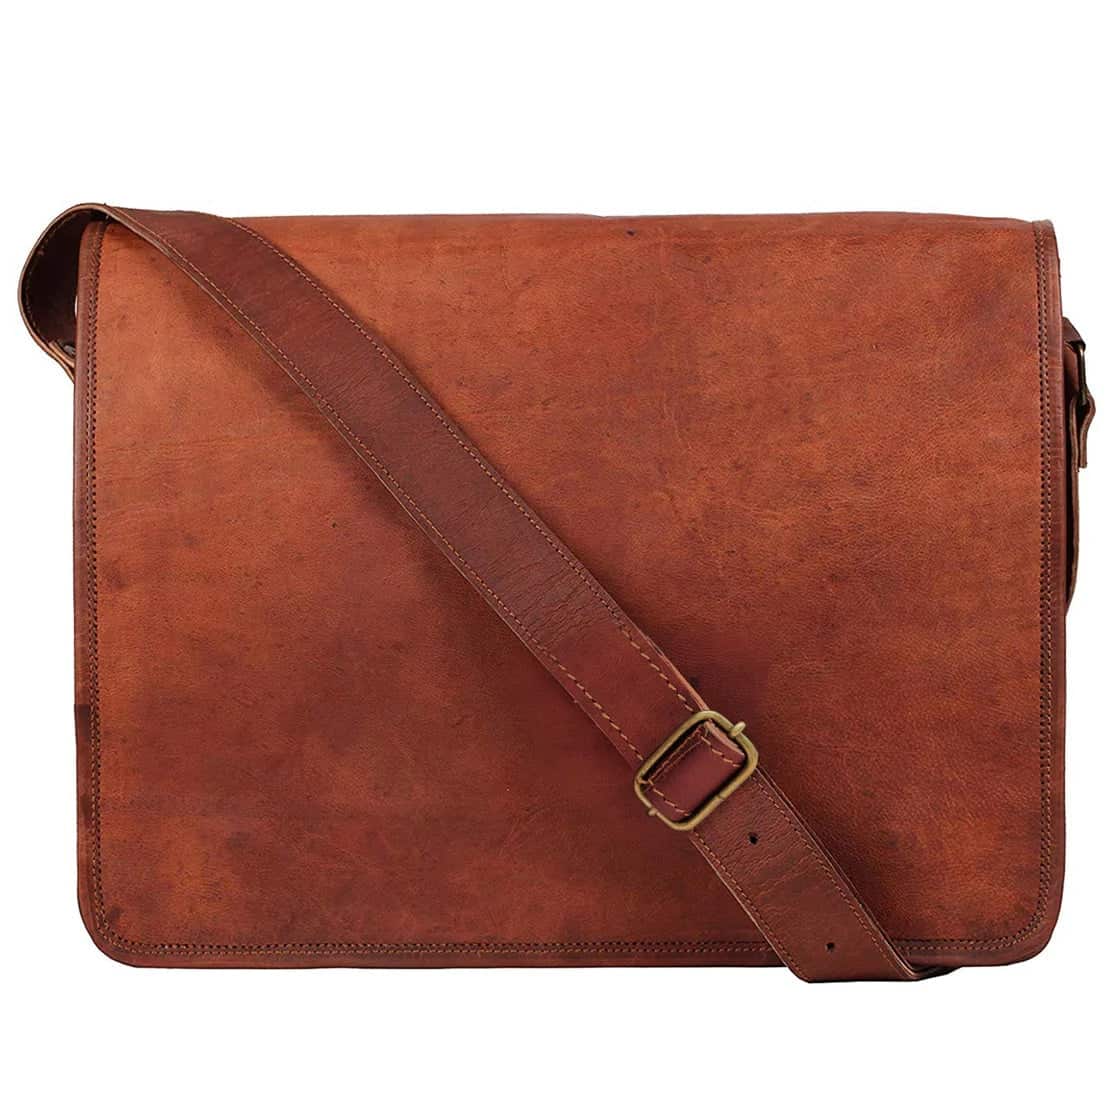 Rustic Town Crossbody Leather Messenger Bag